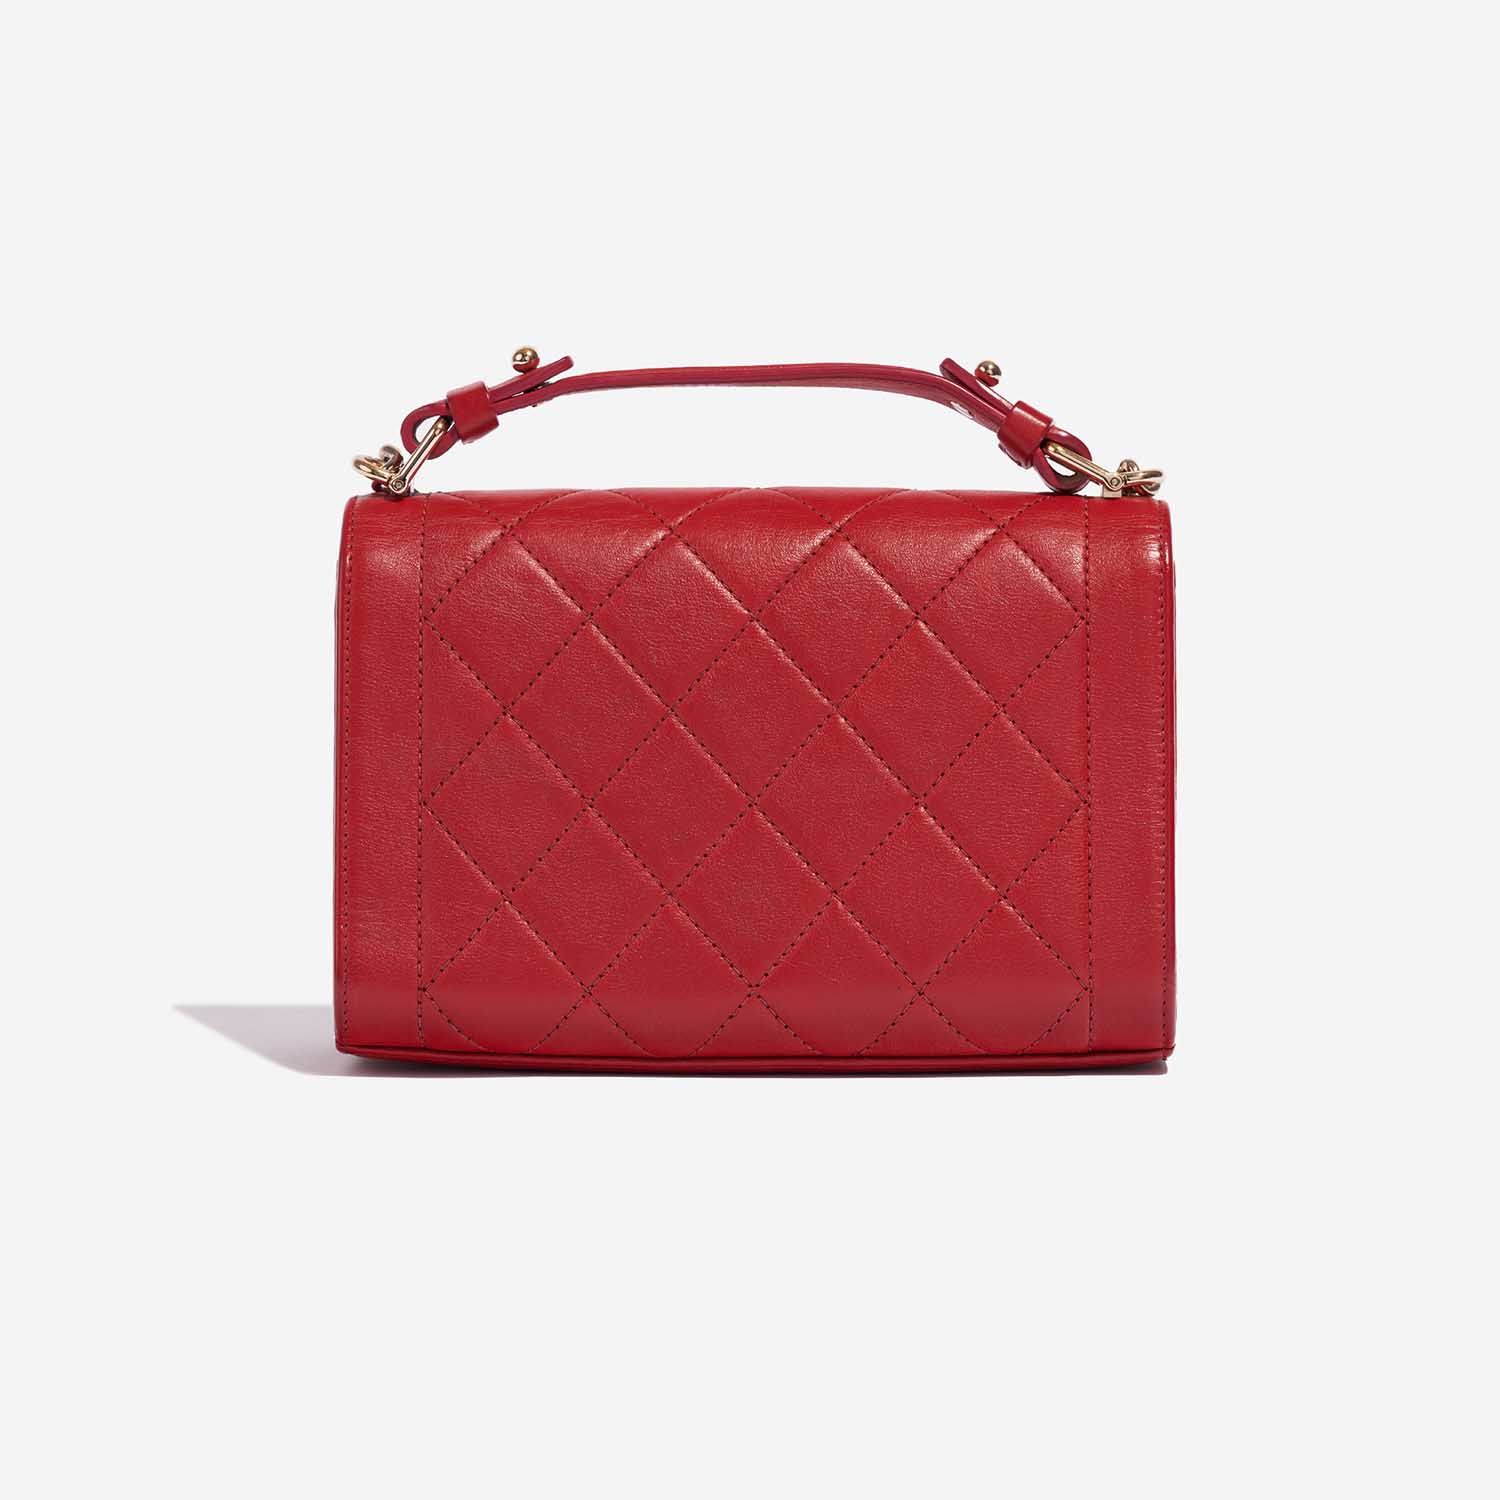 Pre-owned Chanel bag Flap Bag Handle Lamb Red Red Back | Sell your designer bag on Saclab.com